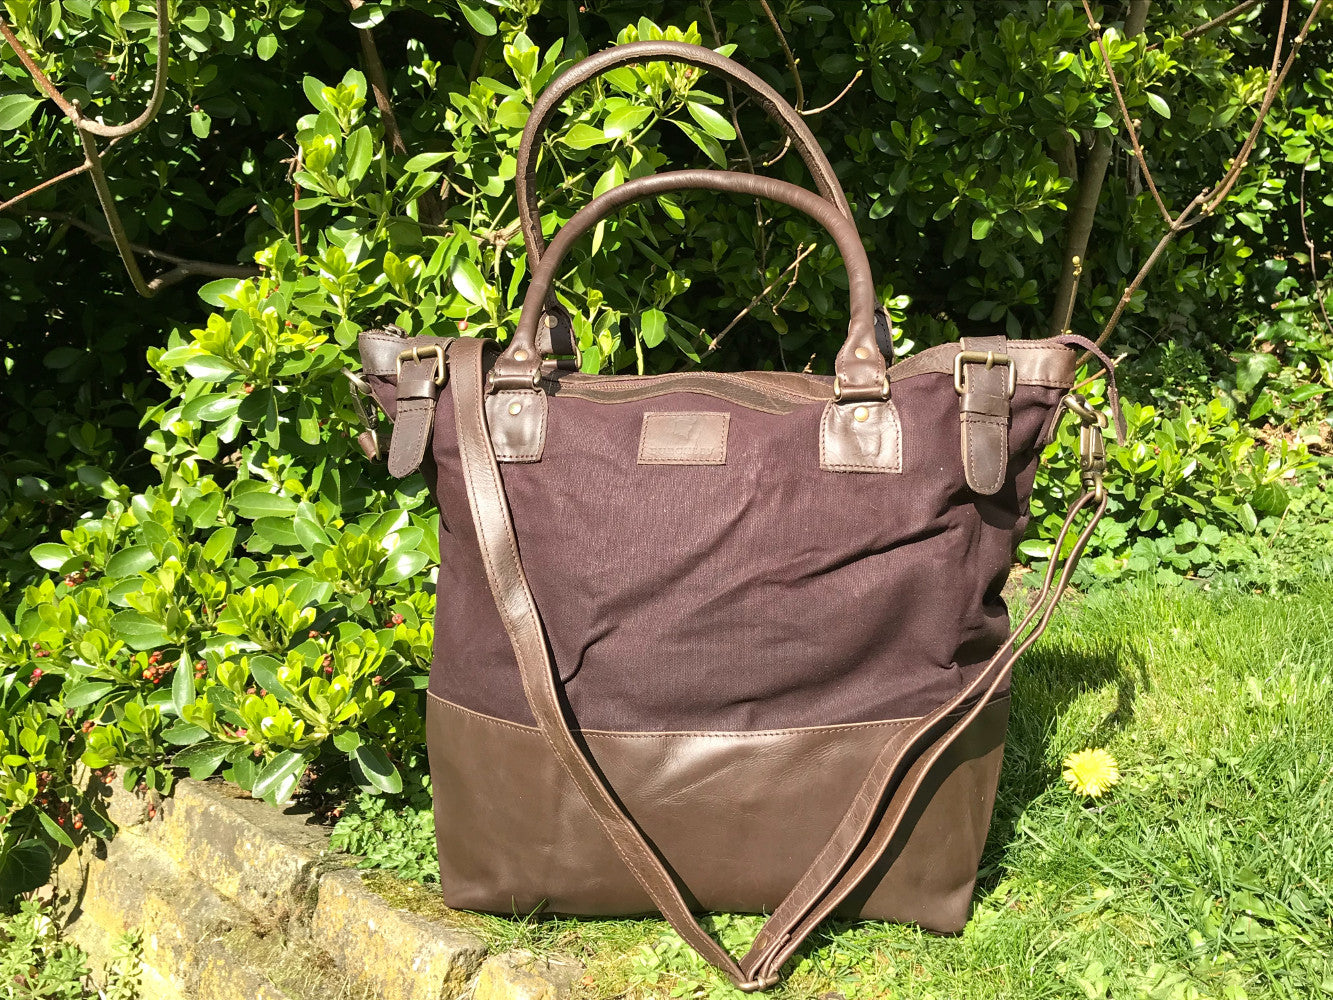 The Bingham.  A classic zipped tote bag by Burghley Bags.  Handmade from eco-friendly vegetable tanned leather and strong cotton canvas, with a leather shoulder strap.  Shown in stylish dark brown.